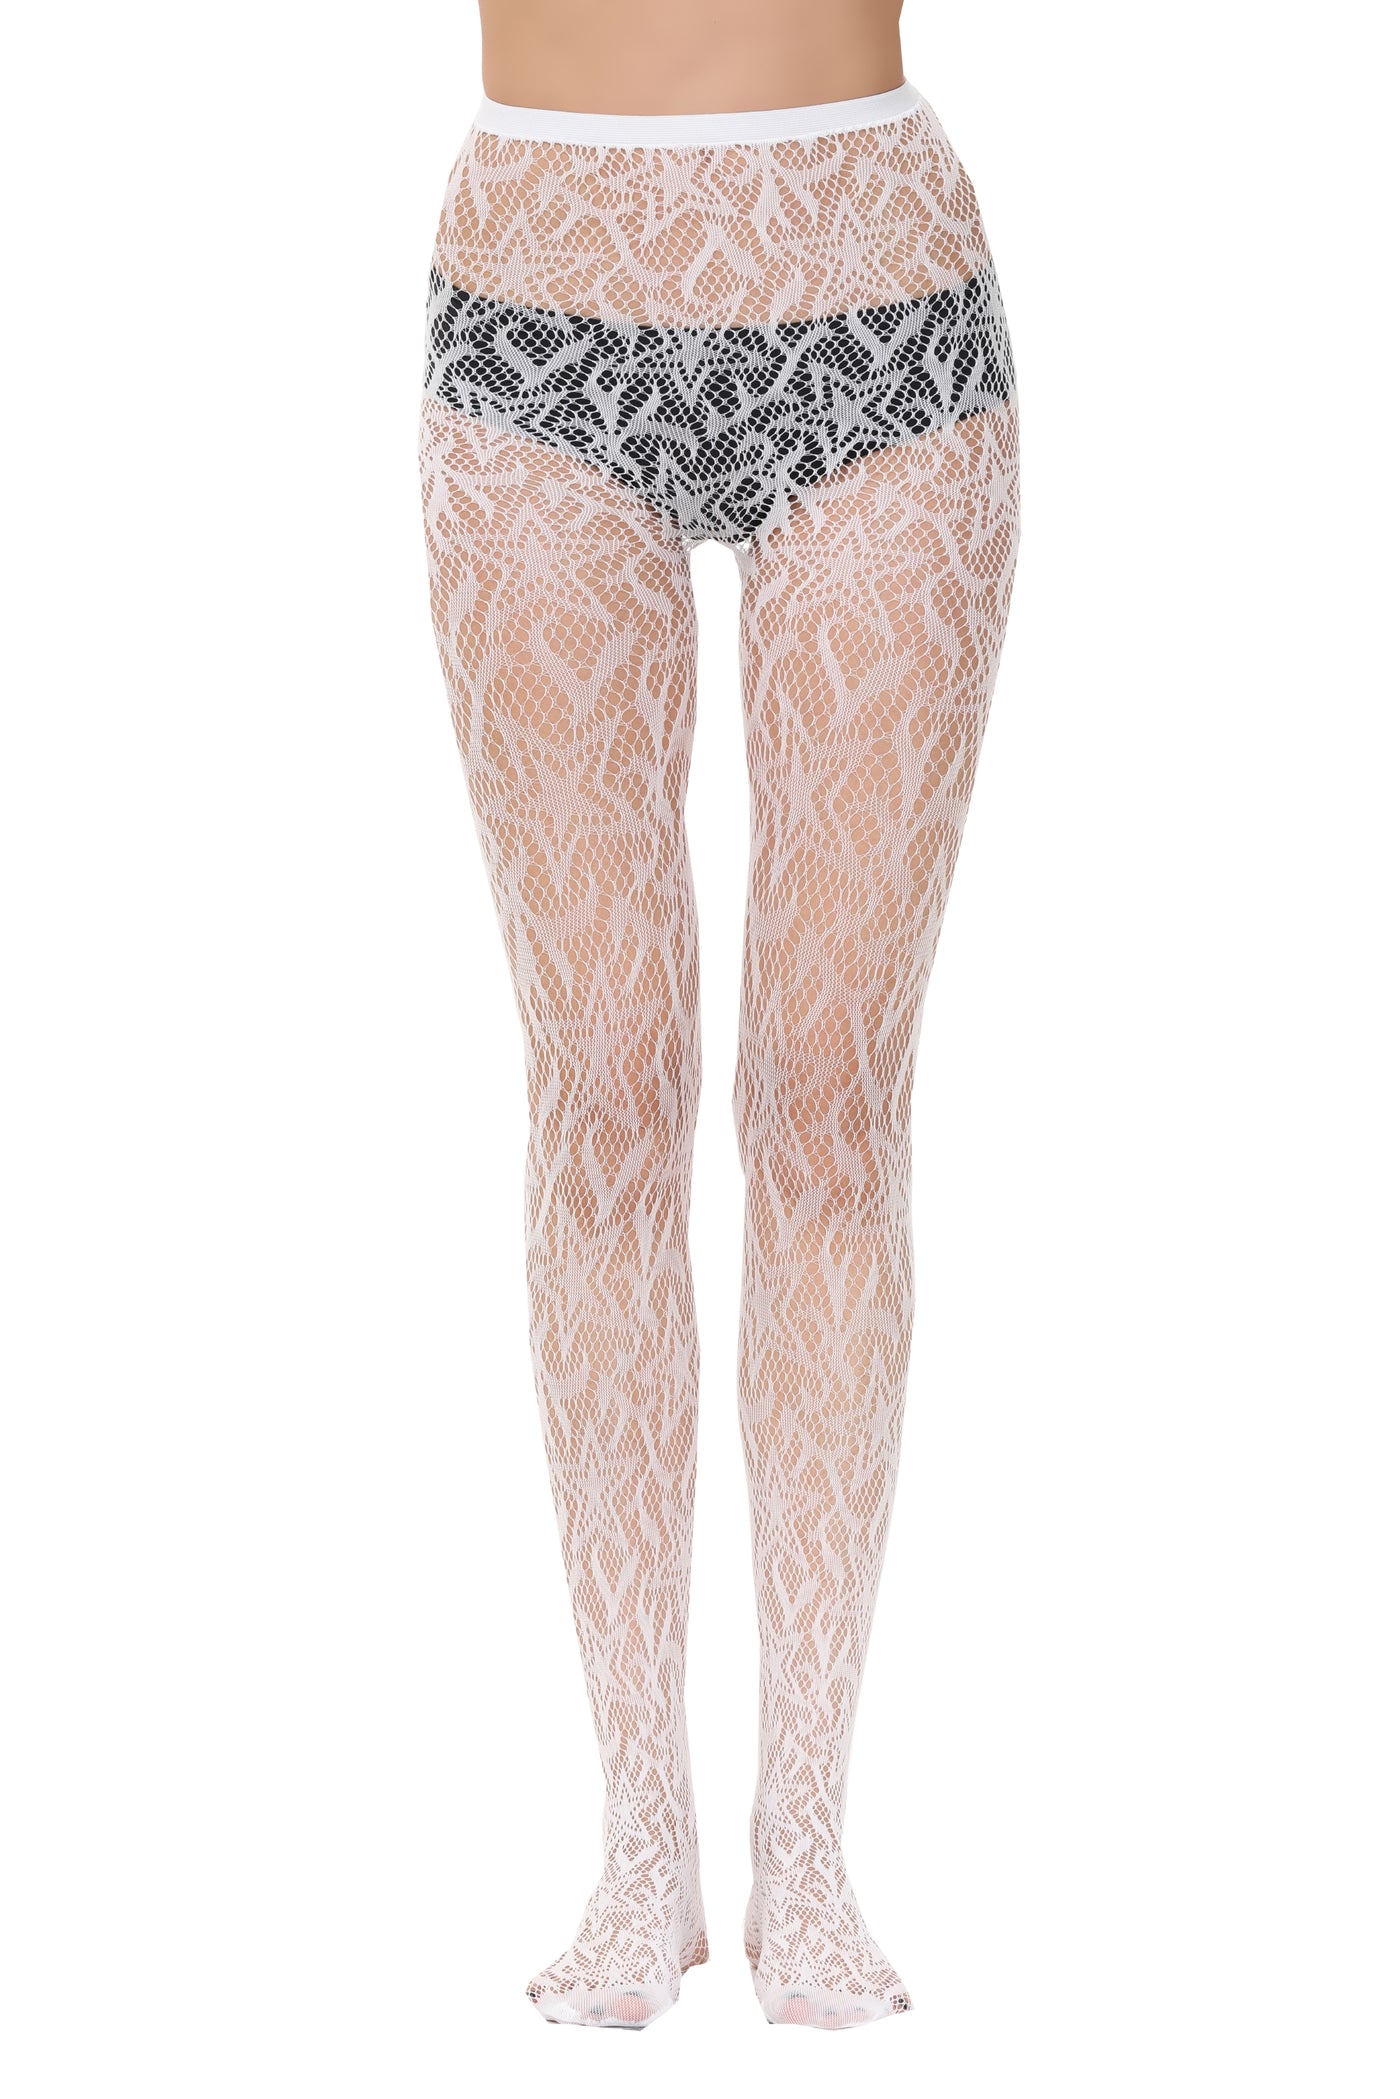 Fishnet Tights 111438-White Front